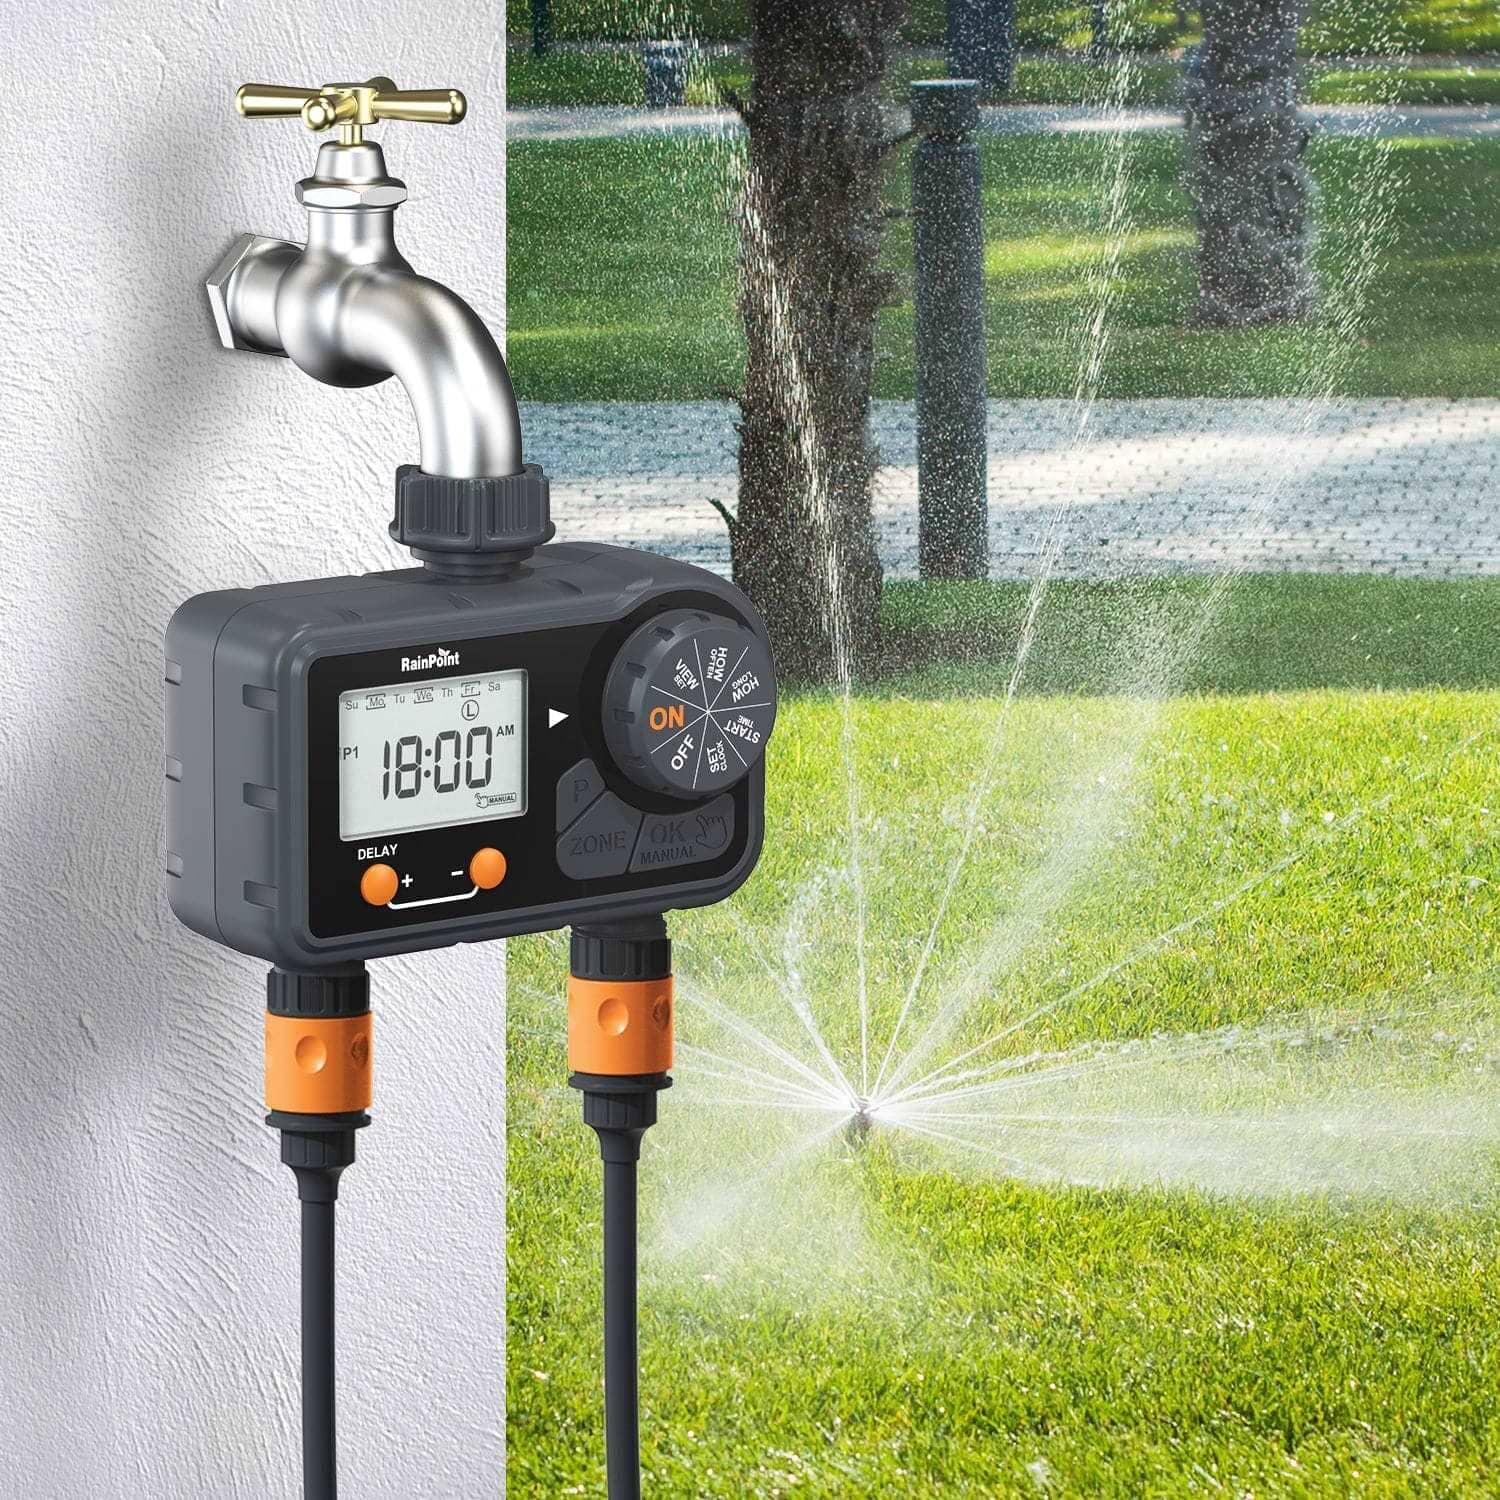 with 6 Programmable Procedure, Hose Timer with Delay/Manual/Auto Irrigation Mode for Week/Specific/Daily Watering